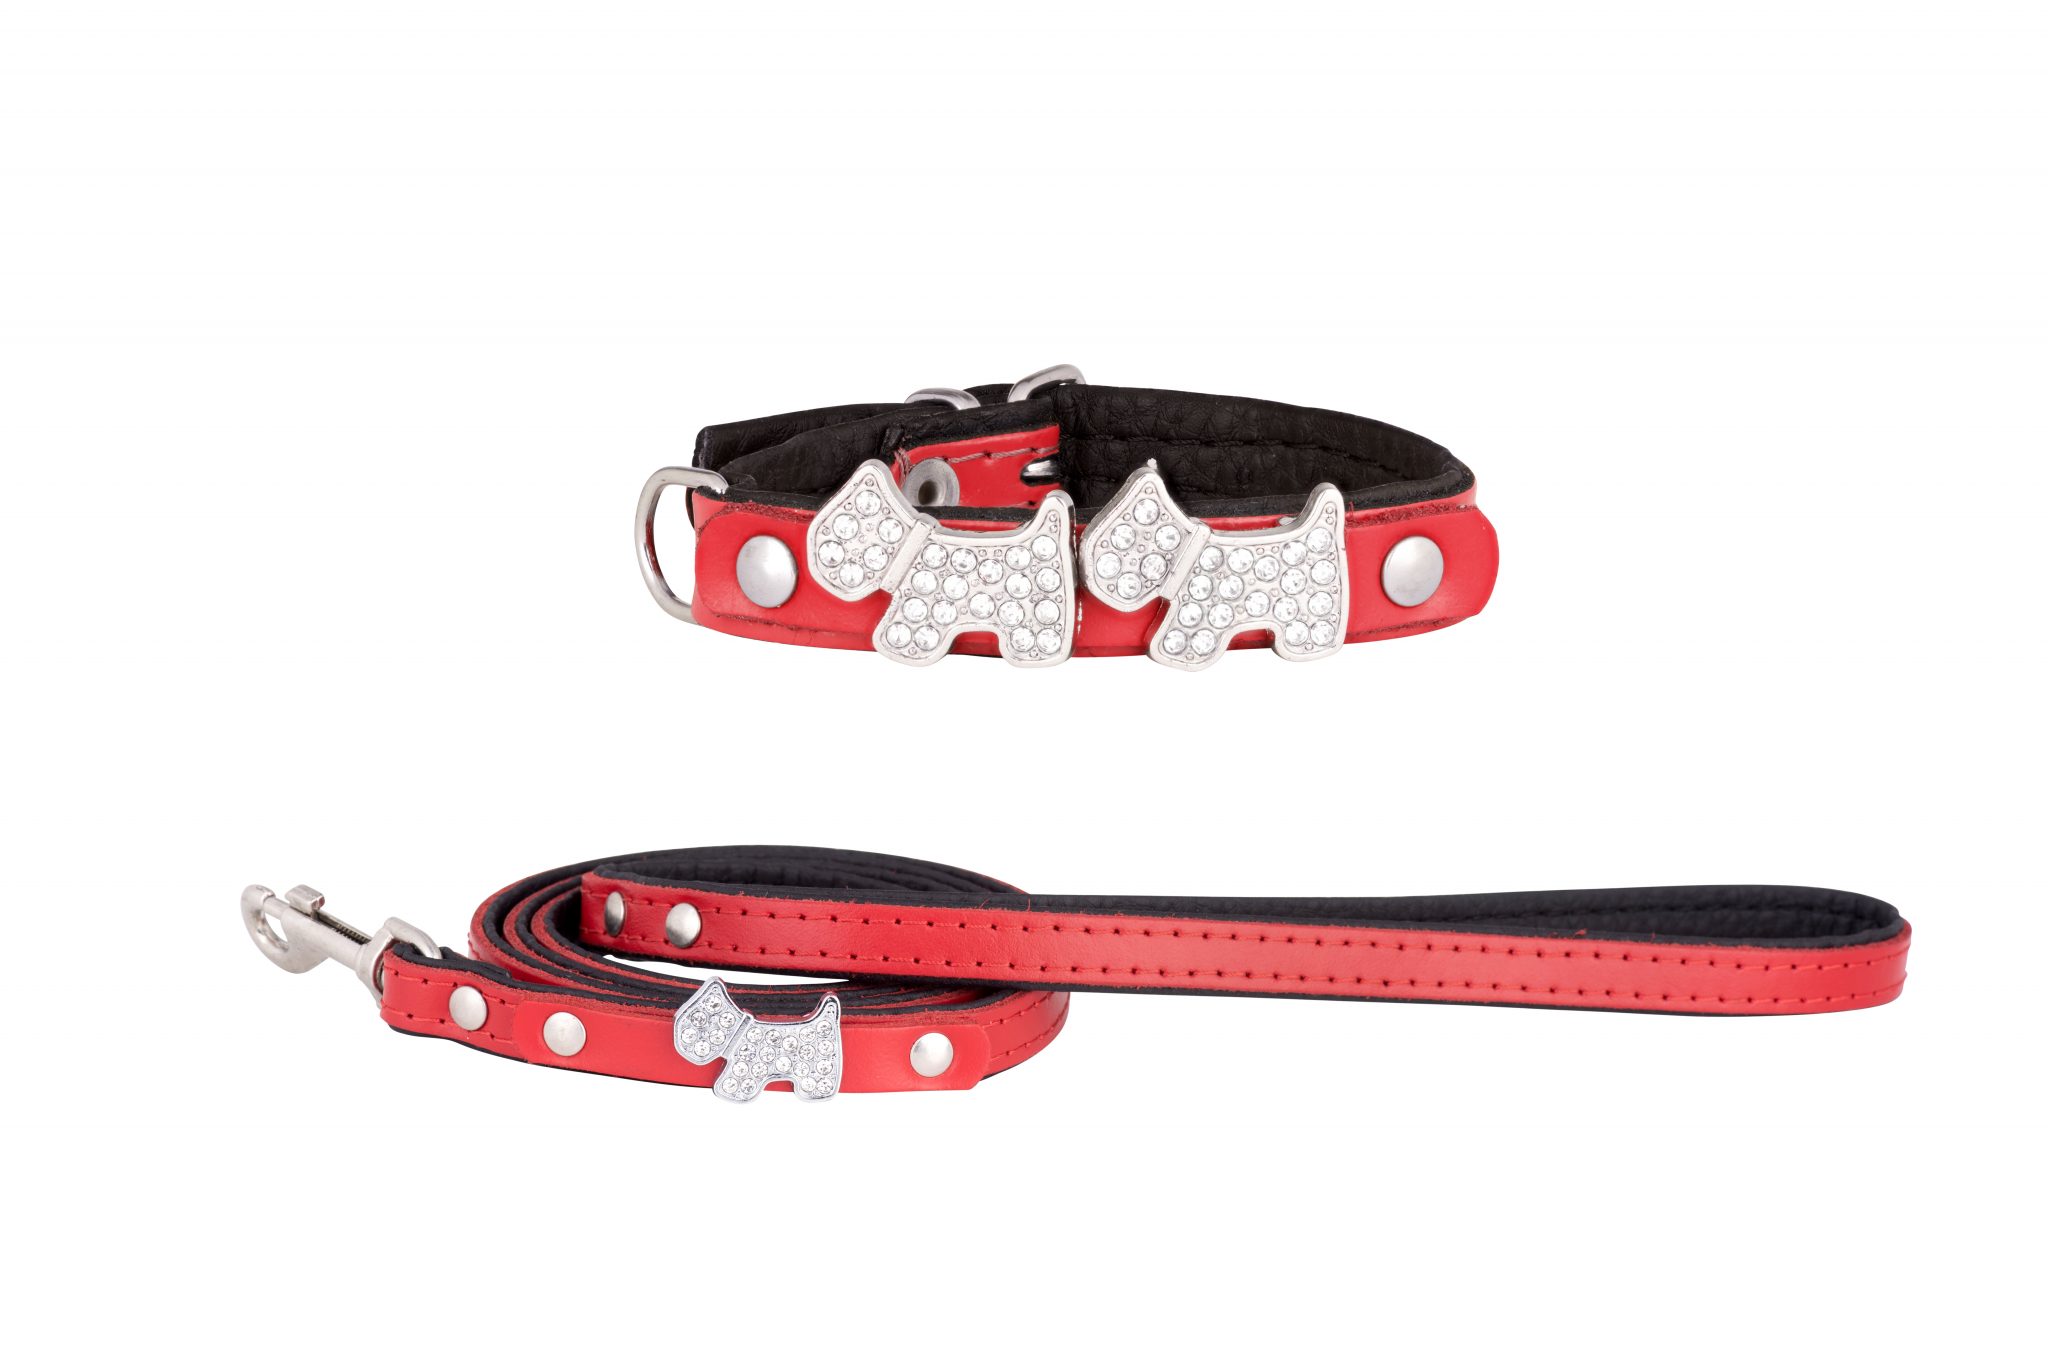 Highland leather designer dog collar and matching leather dog lead by IWOOF